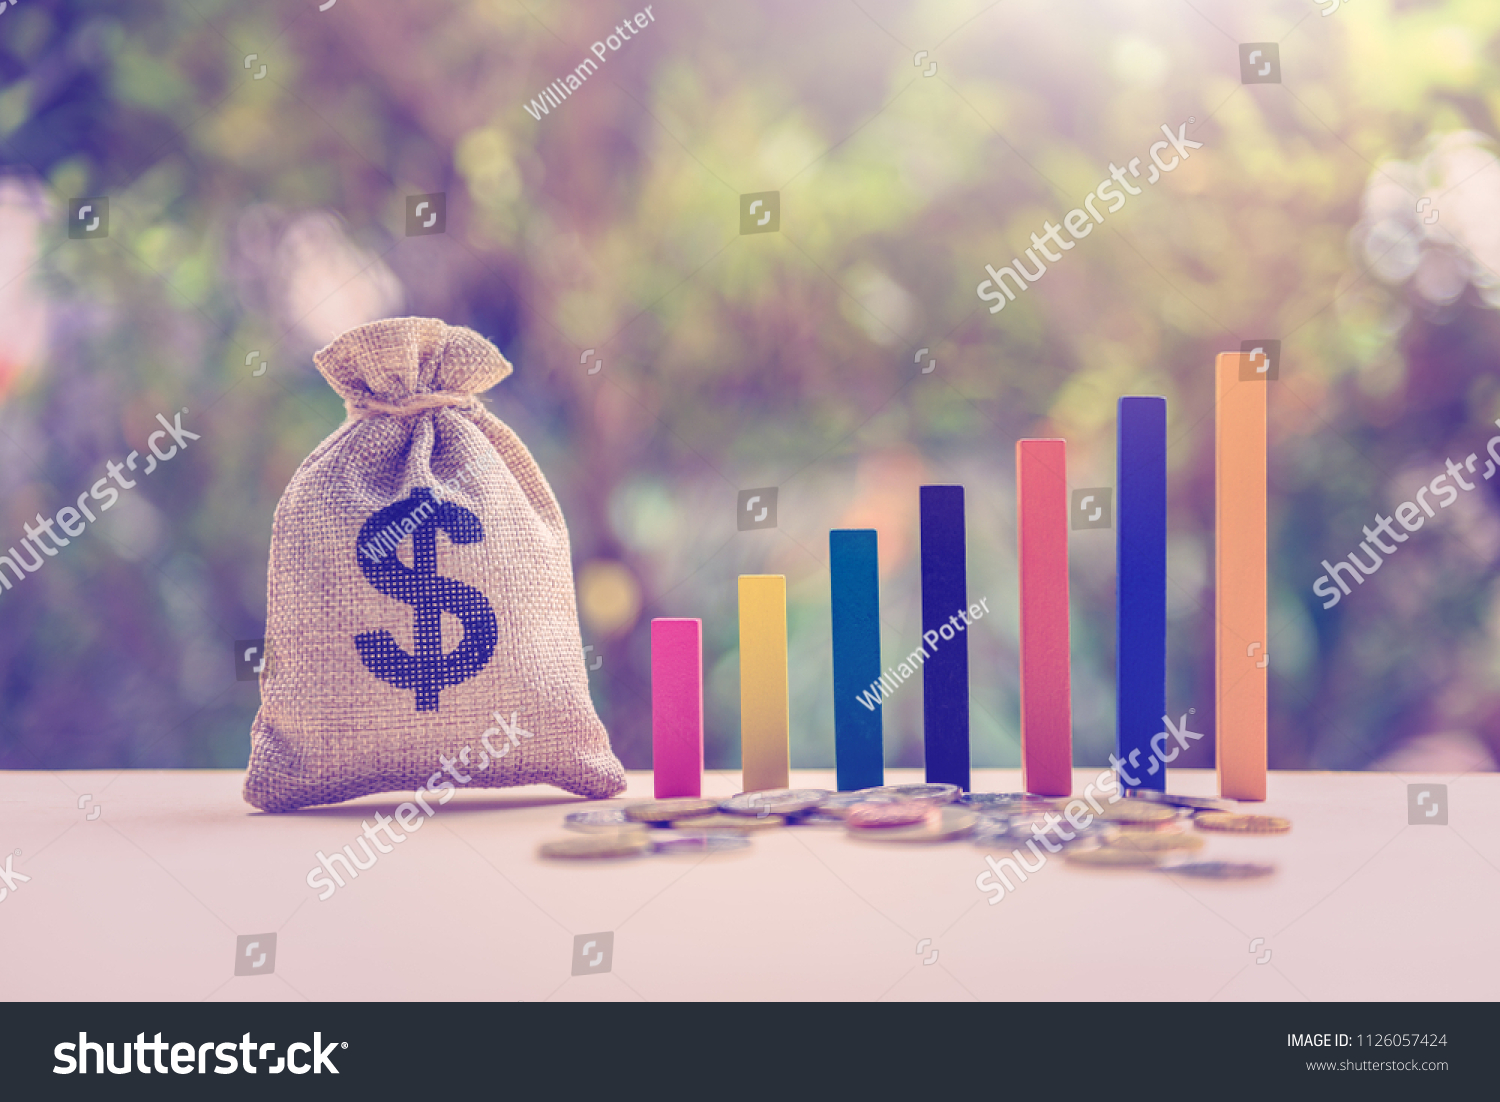 Government budget / public spending concept : Dollar bag, coins, color wood bar graph on a table, depicts the increment in annual financial budget or revenues that government collects from tax payer. #1126057424